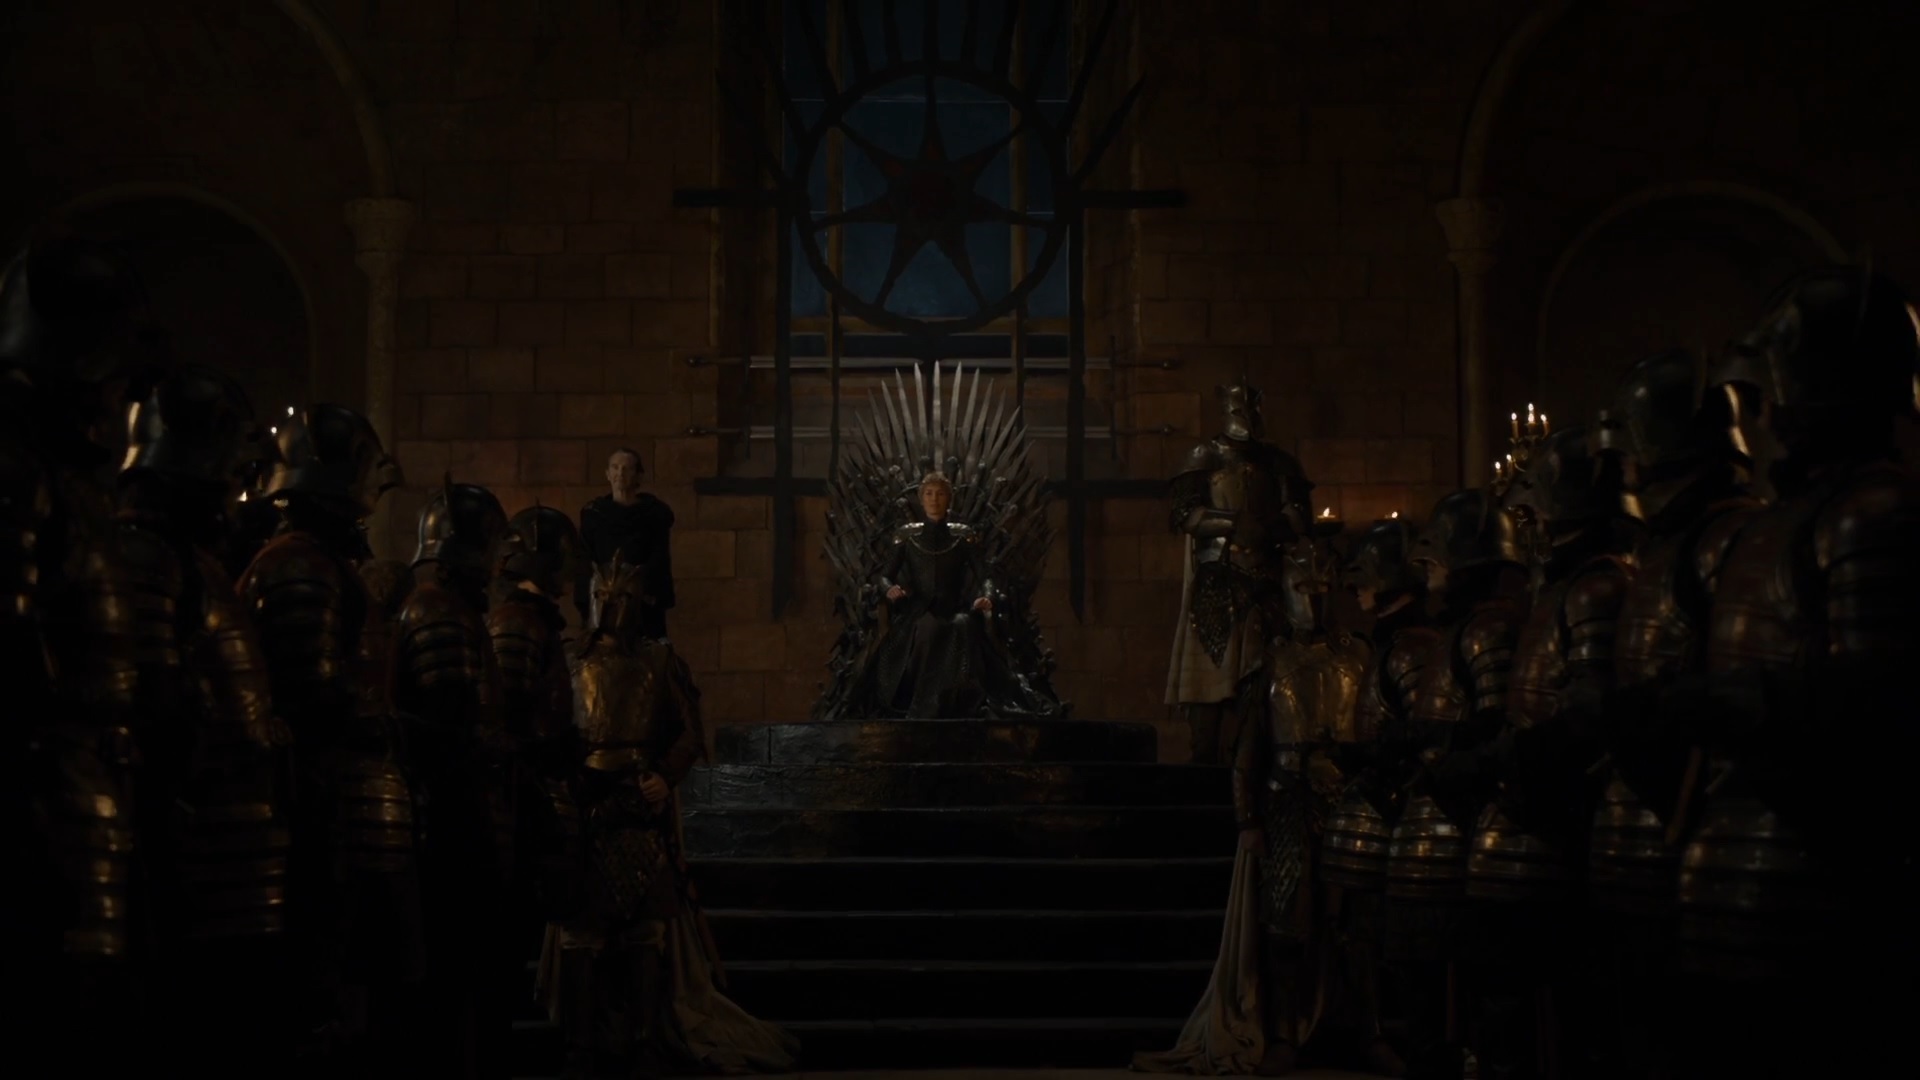 cersei lannister, tv show, iron throne, soldier, throne, game of thrones